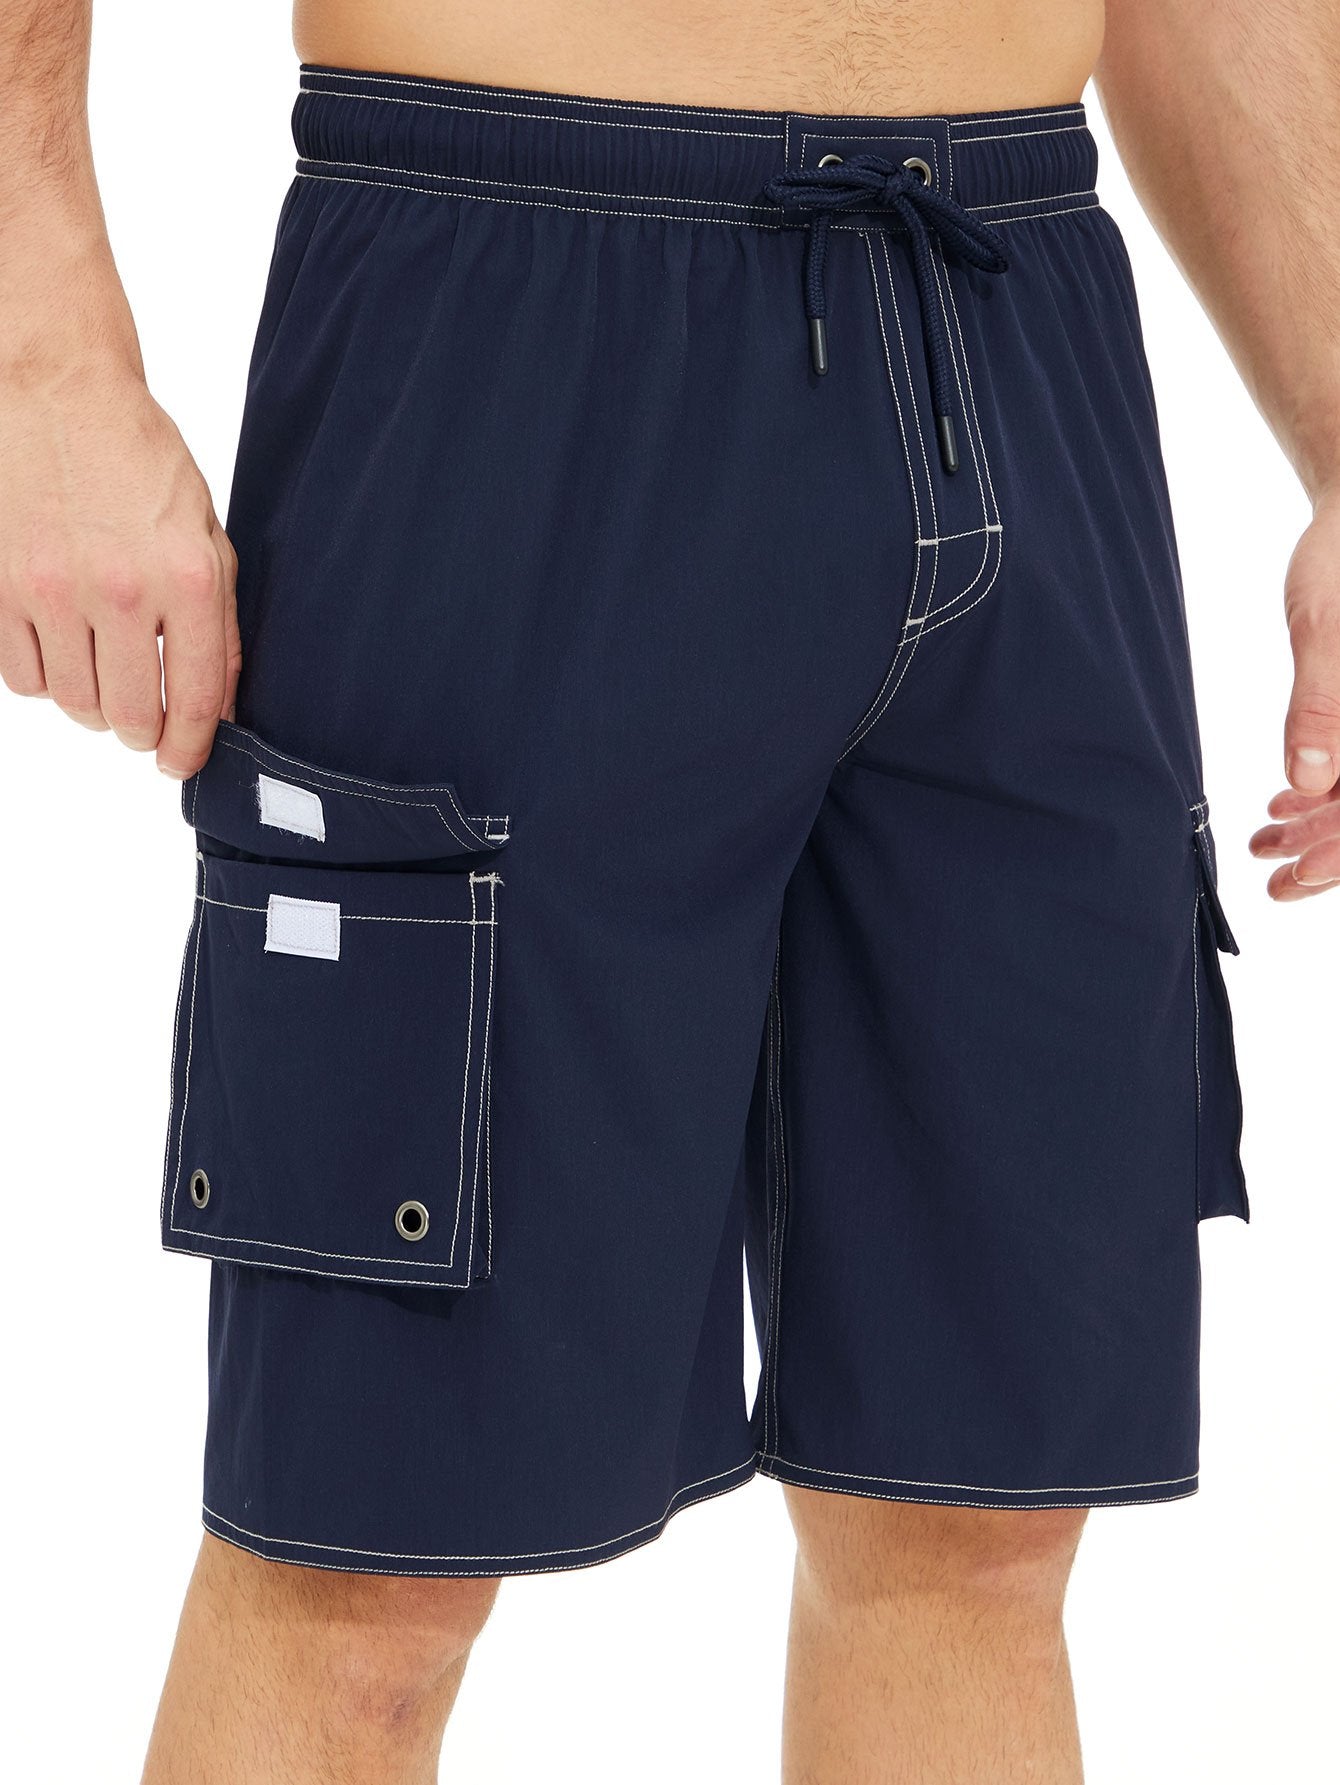 2-in-1 Outdoor Beach Swimming Shorts